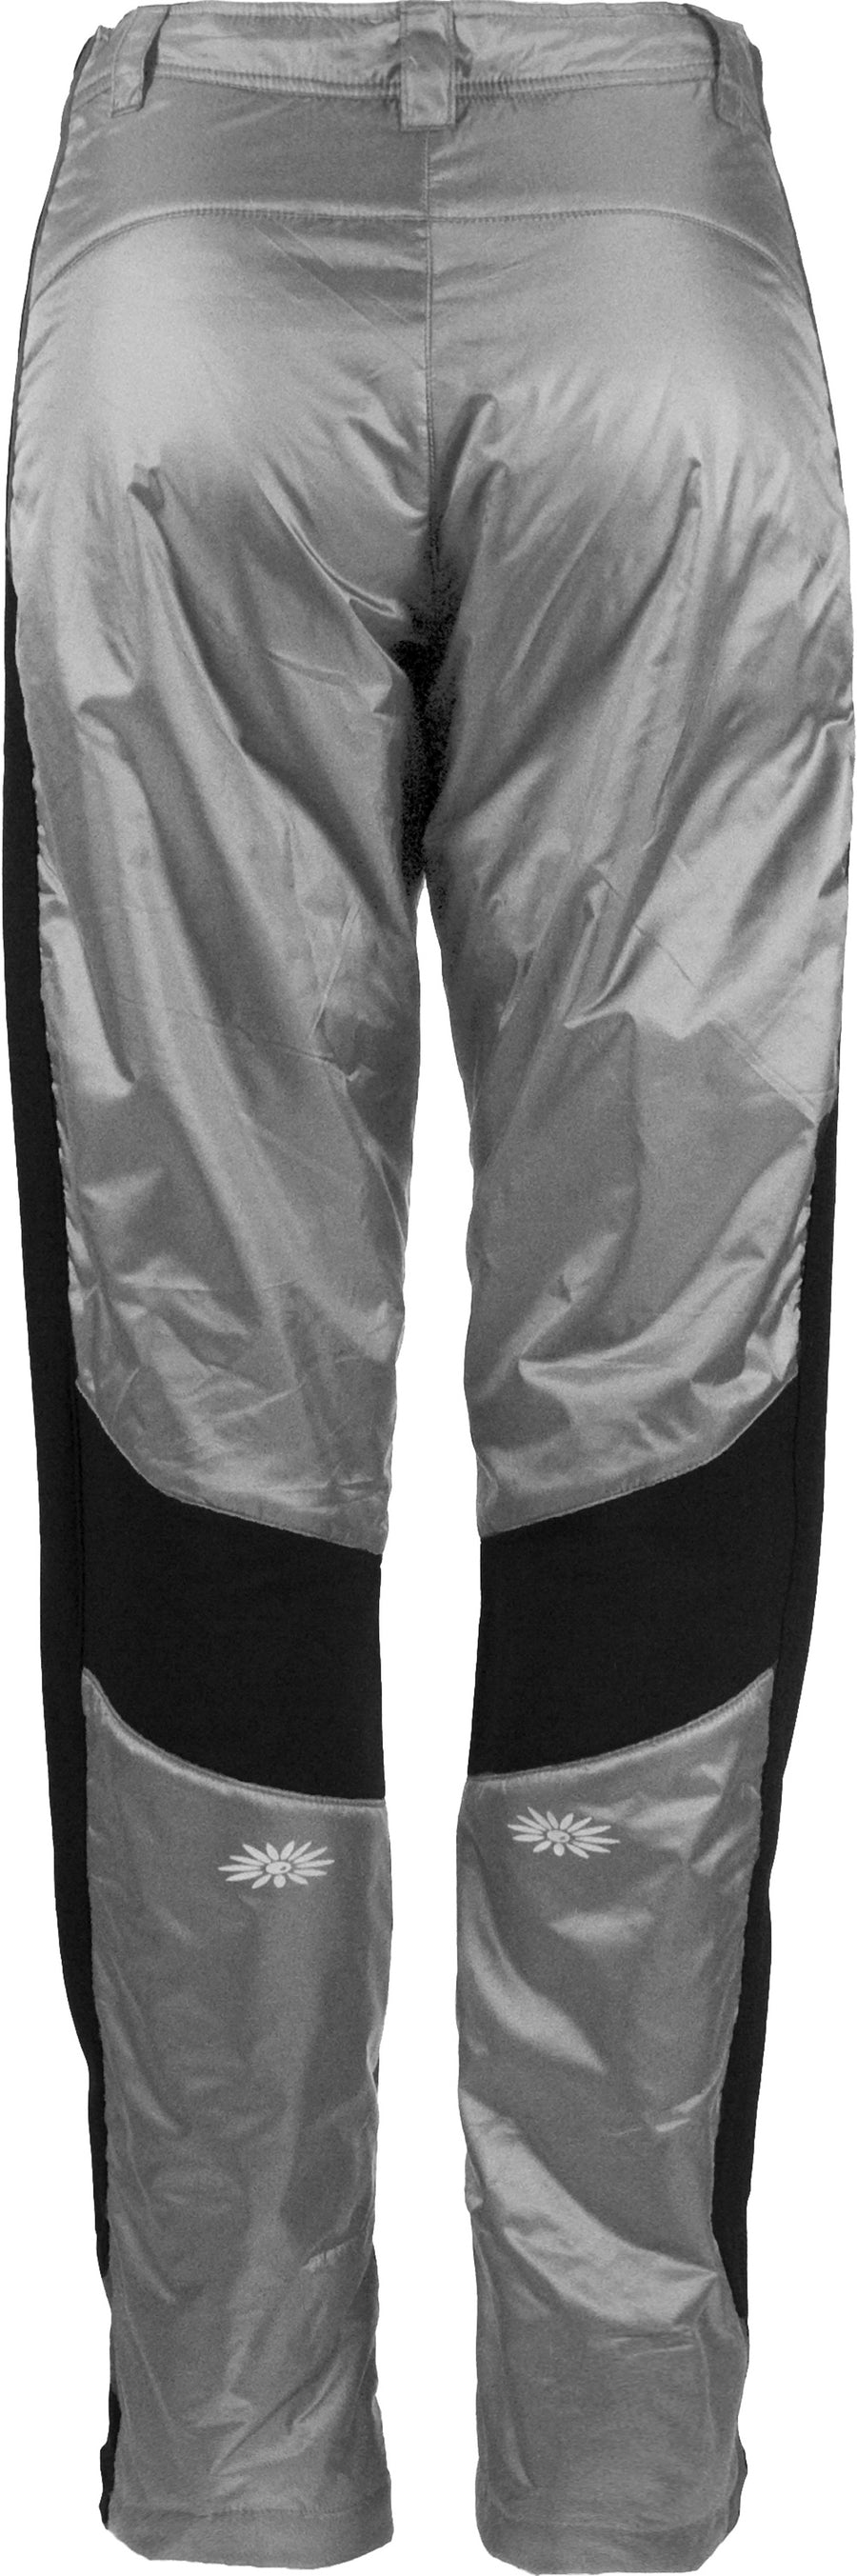 skhoop insulated aluu pants in graphite, back view